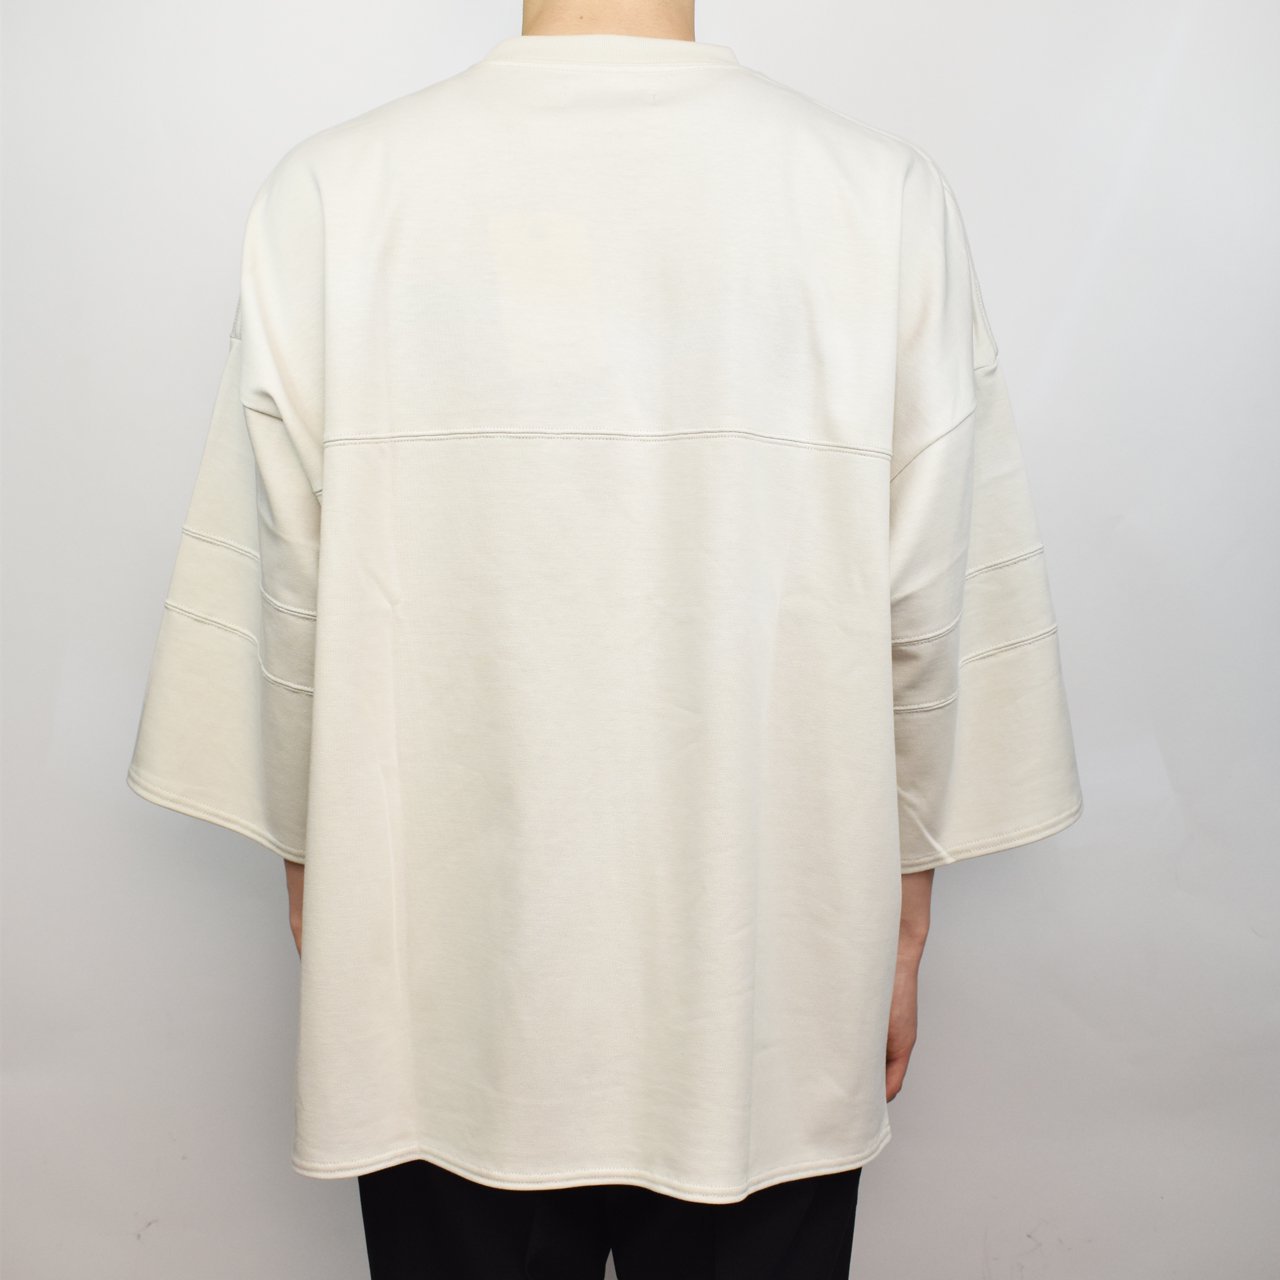 <img class='new_mark_img1' src='https://img.shop-pro.jp/img/new/icons5.gif' style='border:none;display:inline;margin:0px;padding:0px;width:auto;' />marka (ޡ)FOOTBALL TEE OFF WHITE -20//1 RECYCLE SUVIN ORGANIAC COTTON KNIT-